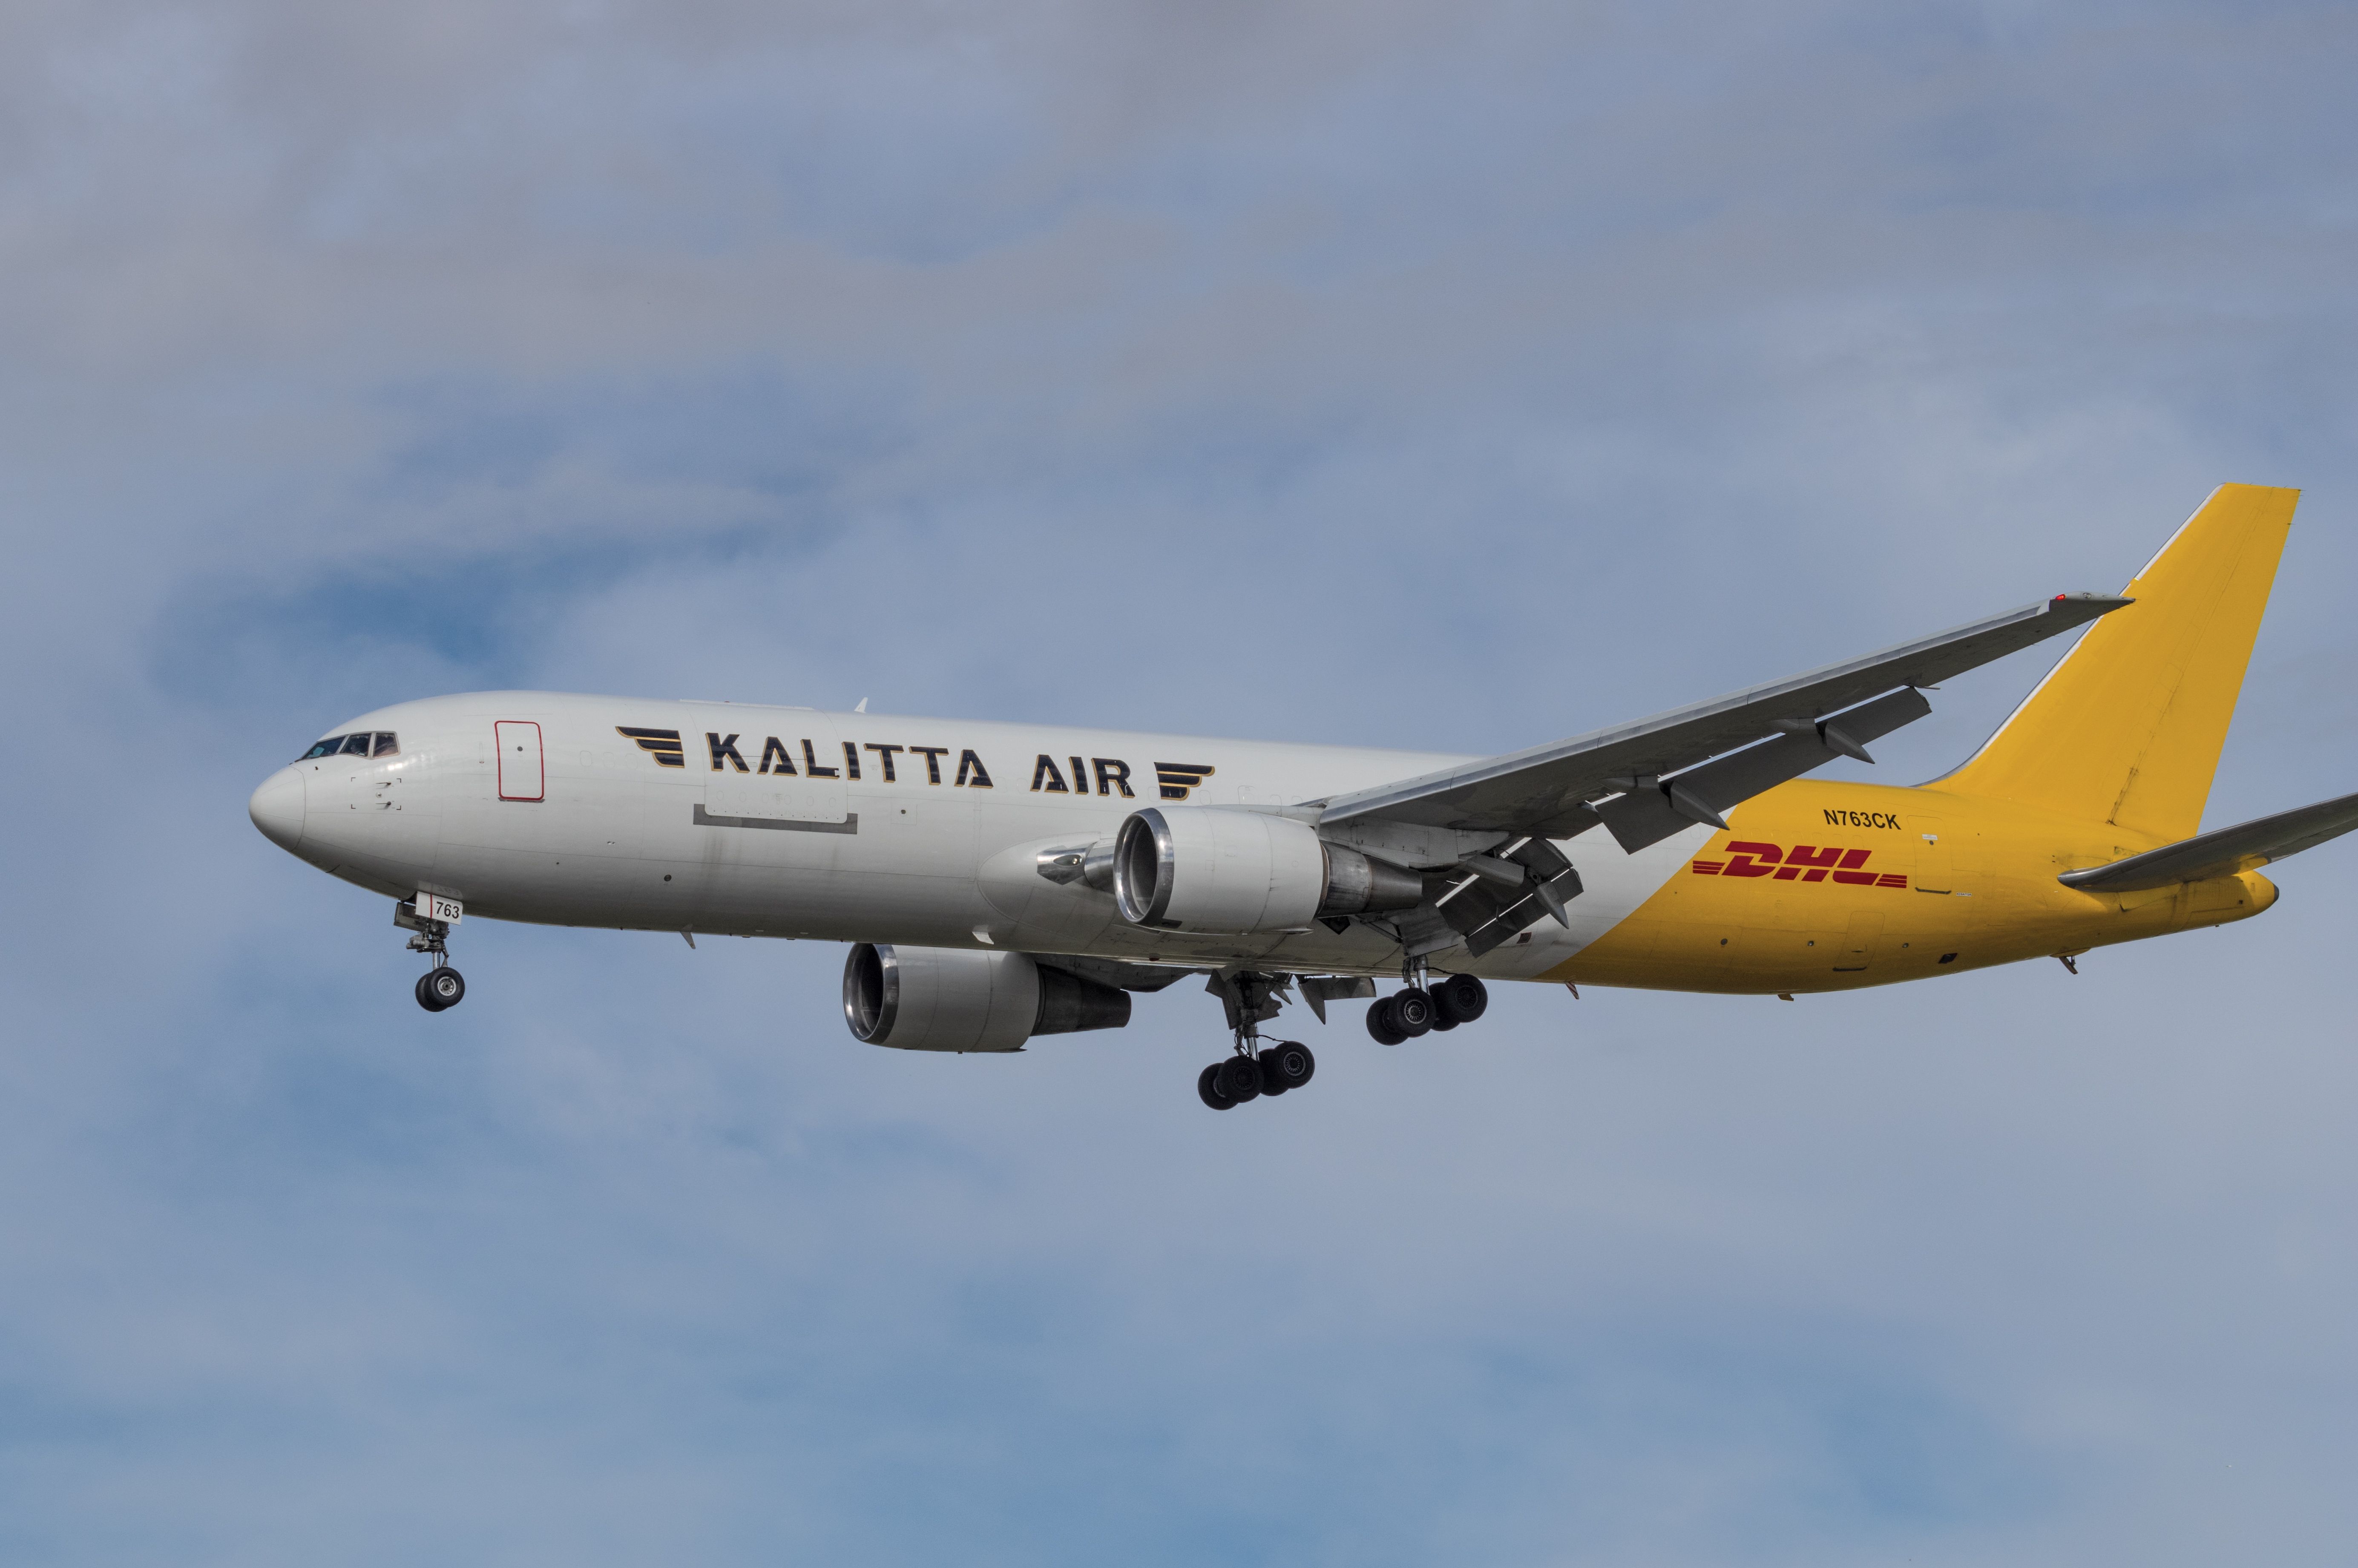 A Kalitta Air Boeing 767 Flying in the sky.